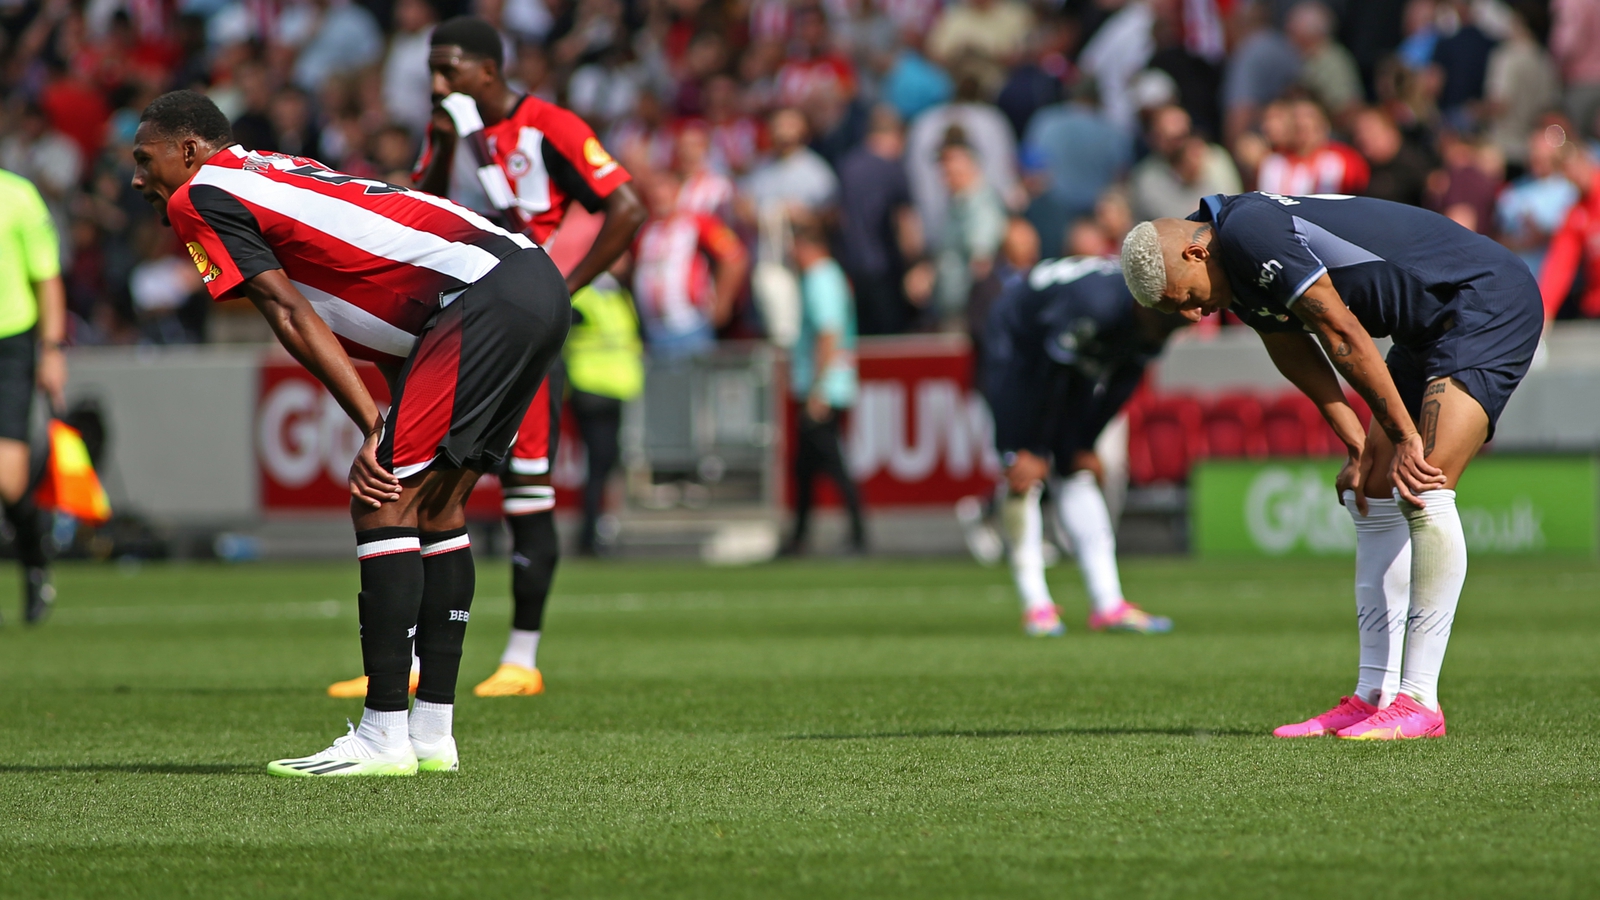 Spurs start post-Kane era with a 2-2 draw at Brentford